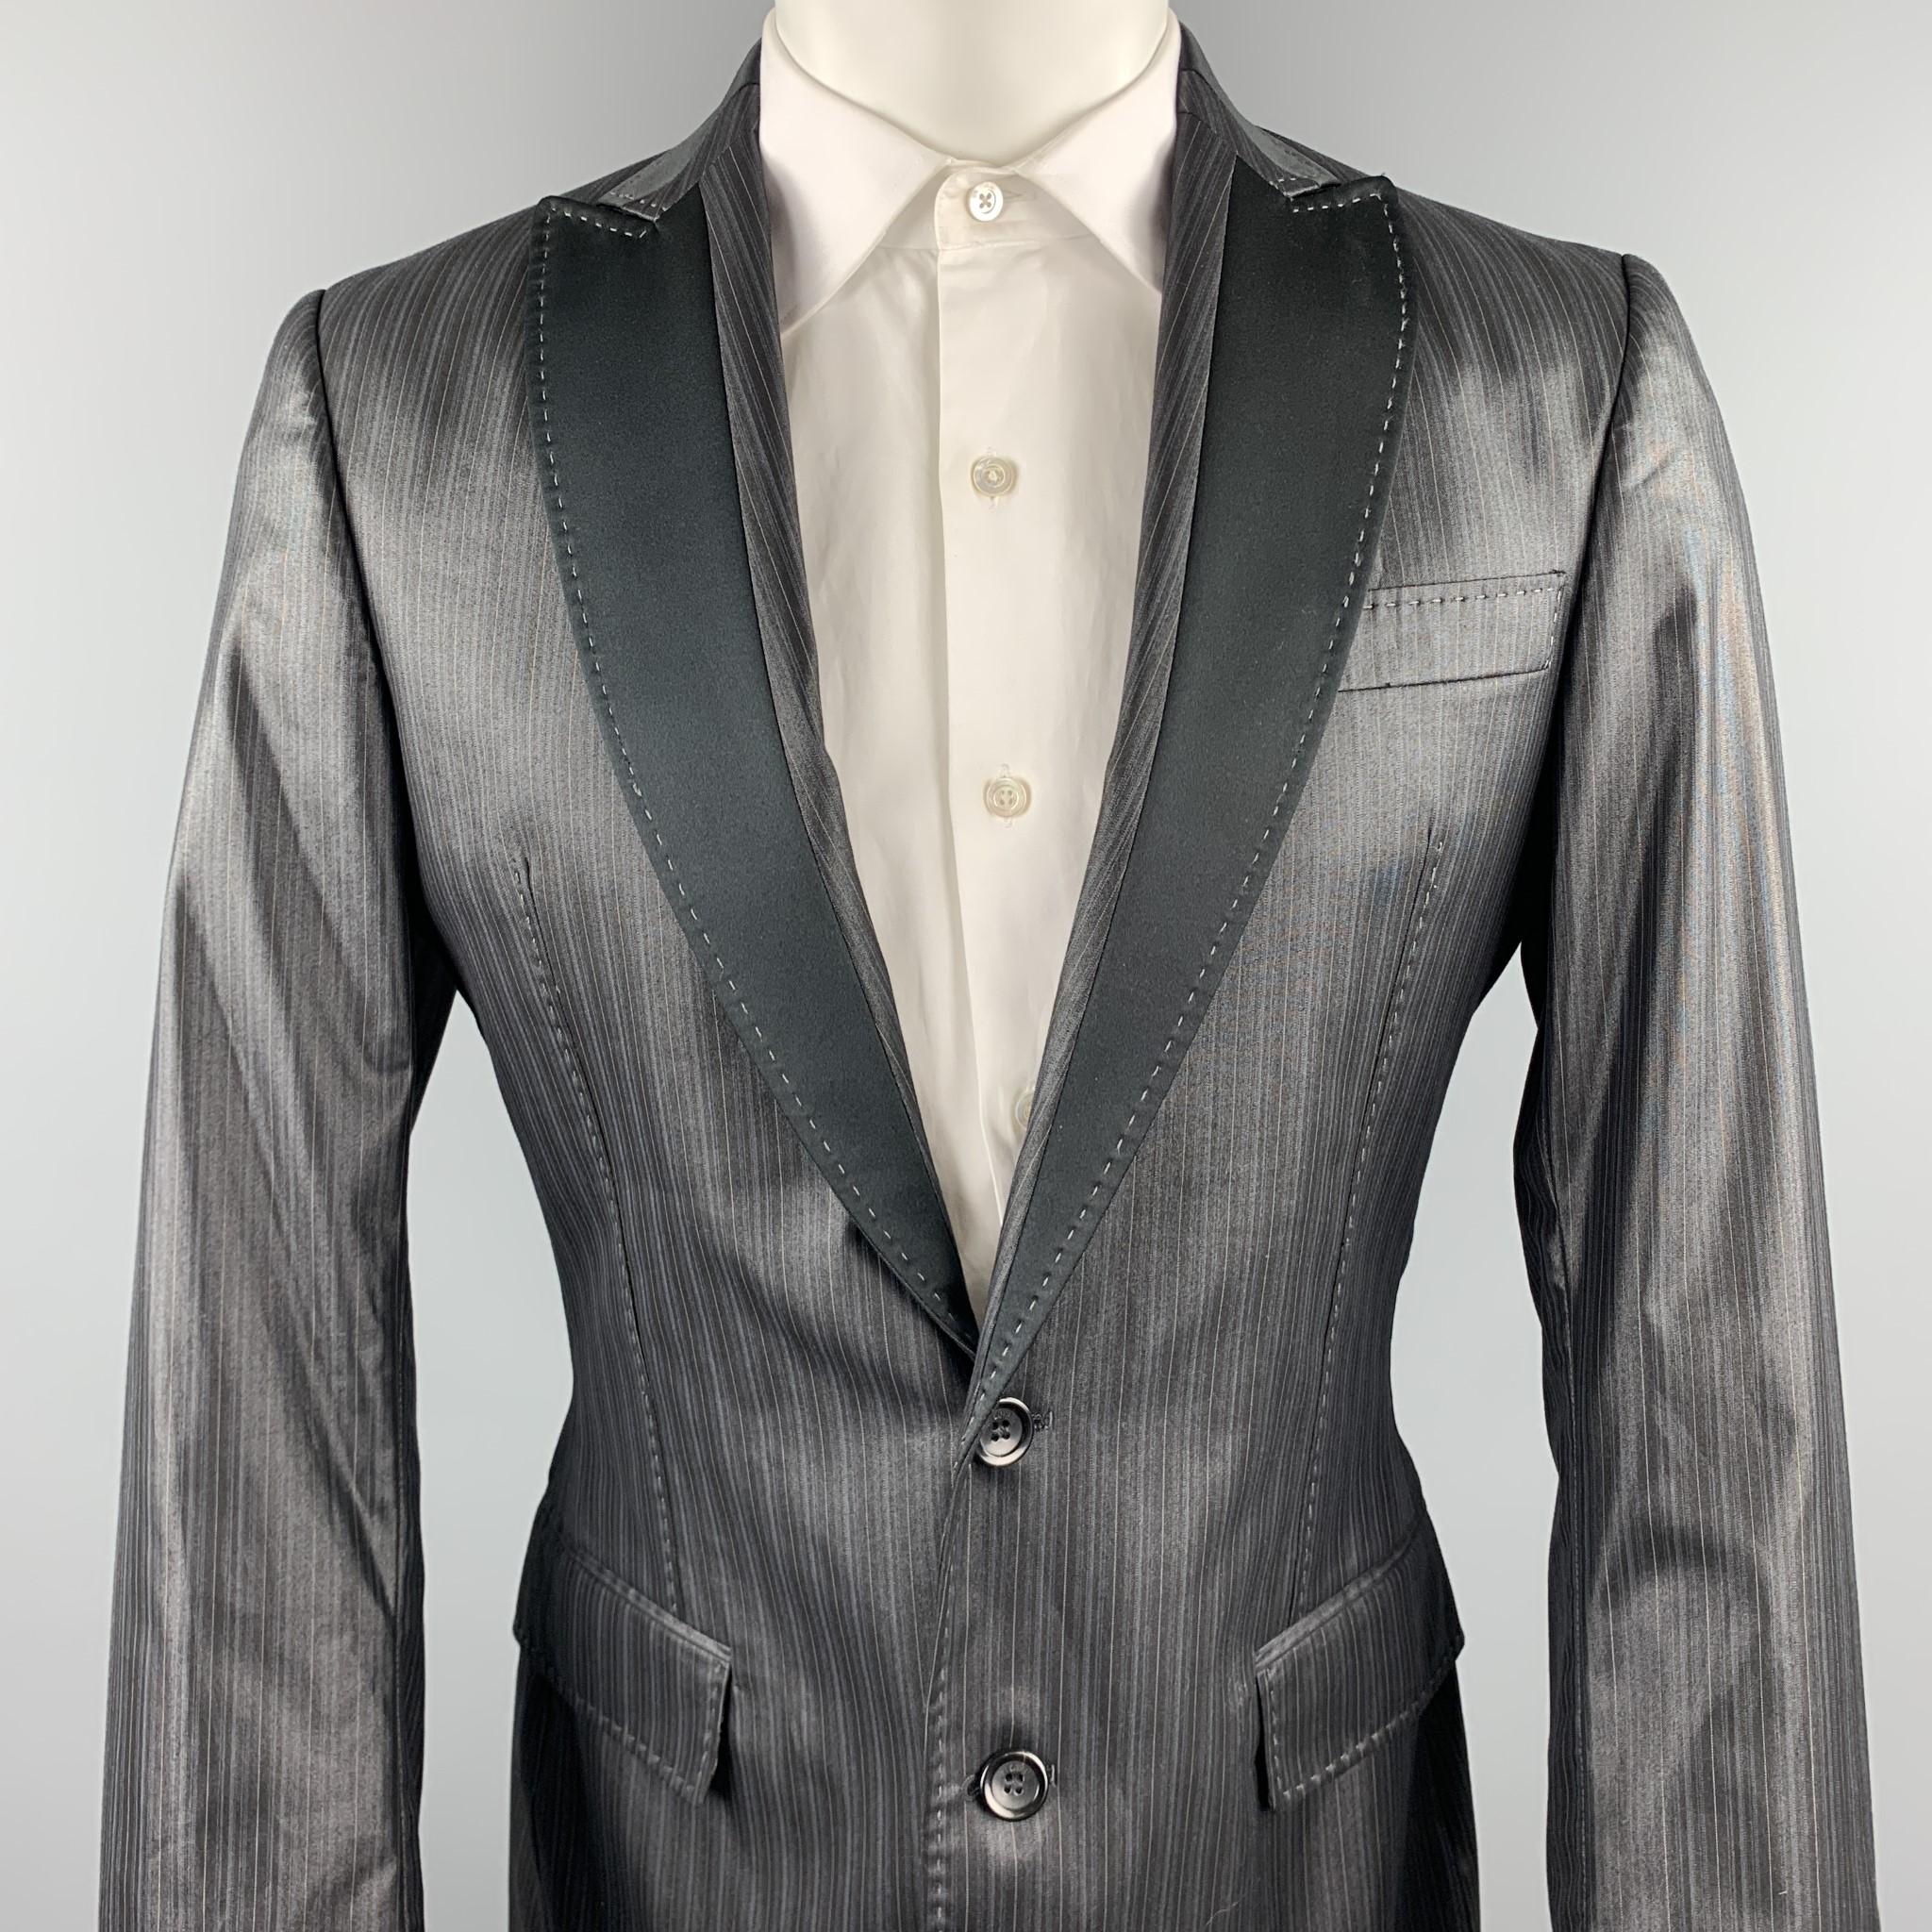 JUST CAVALLI sport coat comes in a black stripe polyester blend featuring a peak lapel style, snake print liner, contrast stitching, flap pockets, and a two button closure. Made in Italy.

Excellent Pre-Owned Condition.
Marked: IT